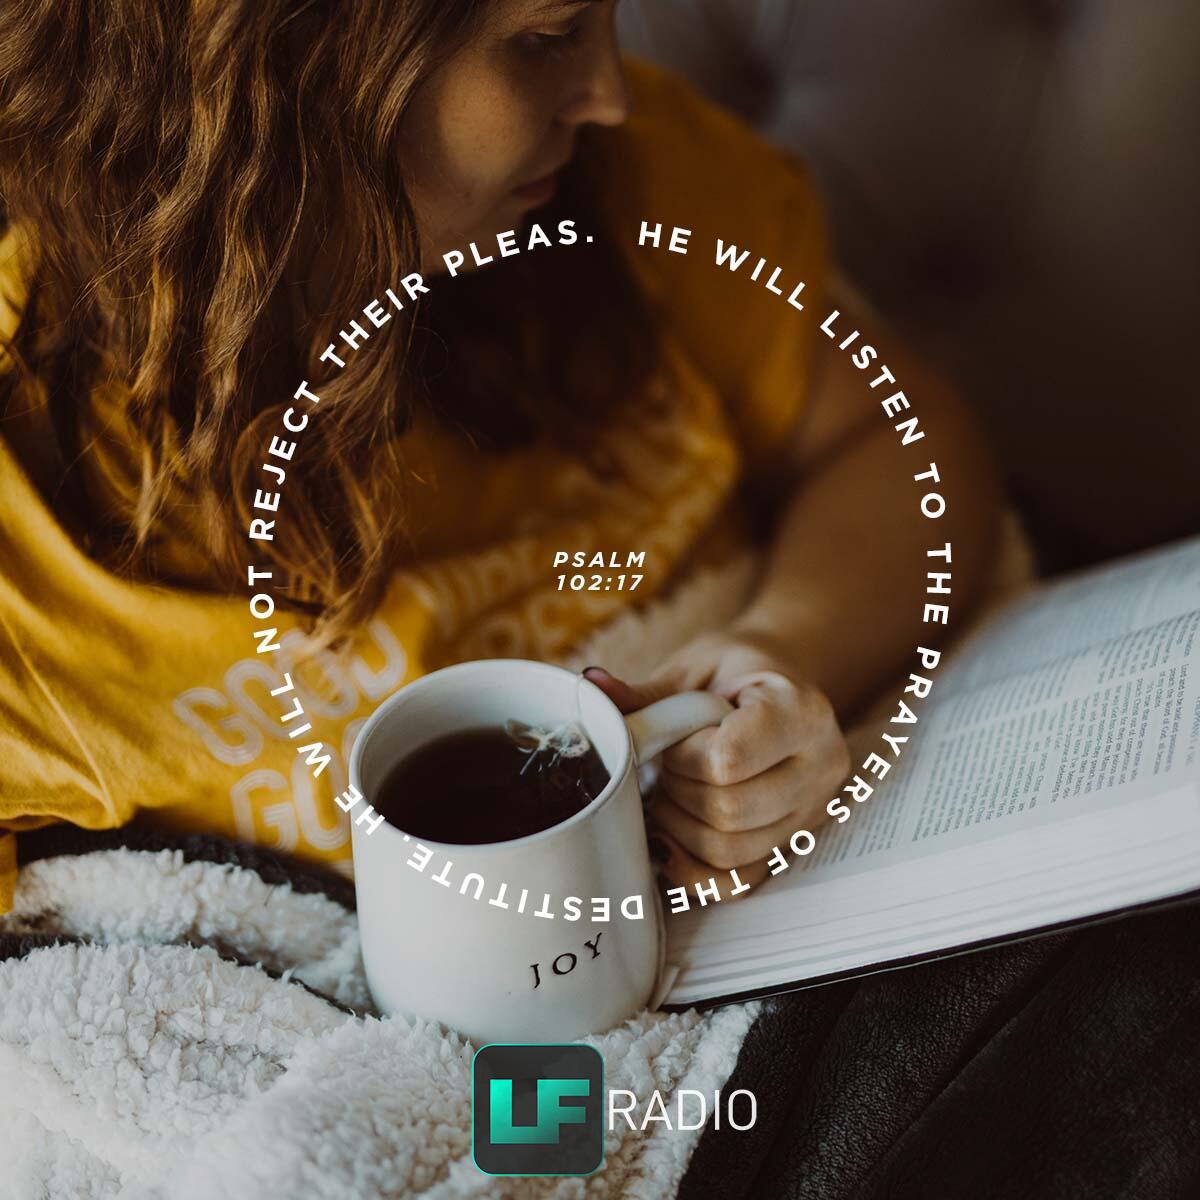 Psalm 102:17 - Verse of the Day